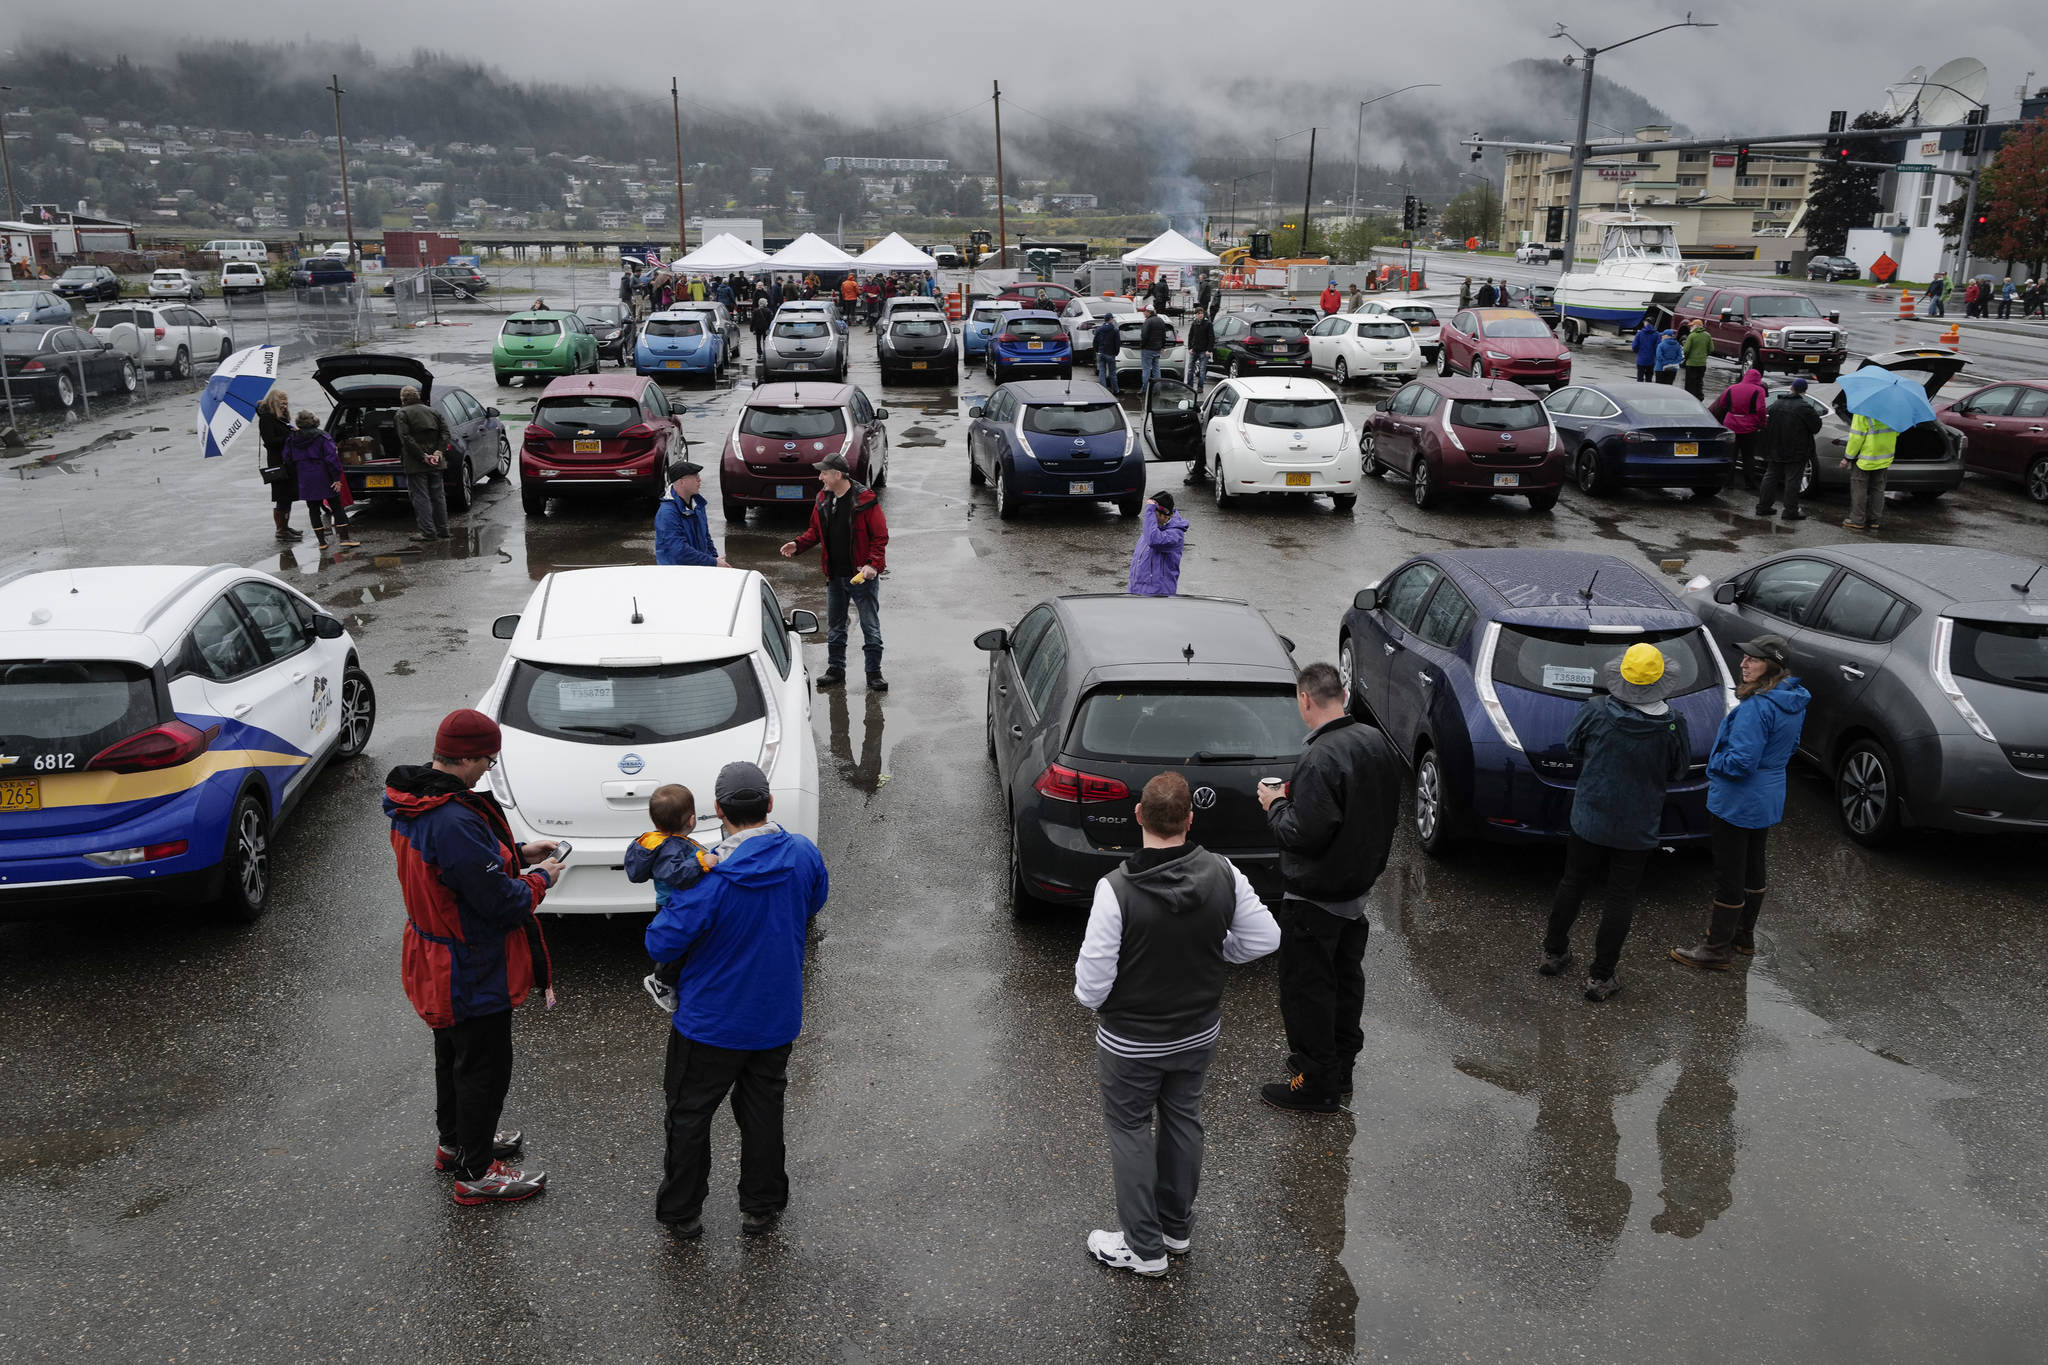 Juneau residents meet for the Sixth Annual Electric Vehicle Juneau Roundup on Saturday, Sept. 21, 2019. (Michael Penn | Juneau Empire)